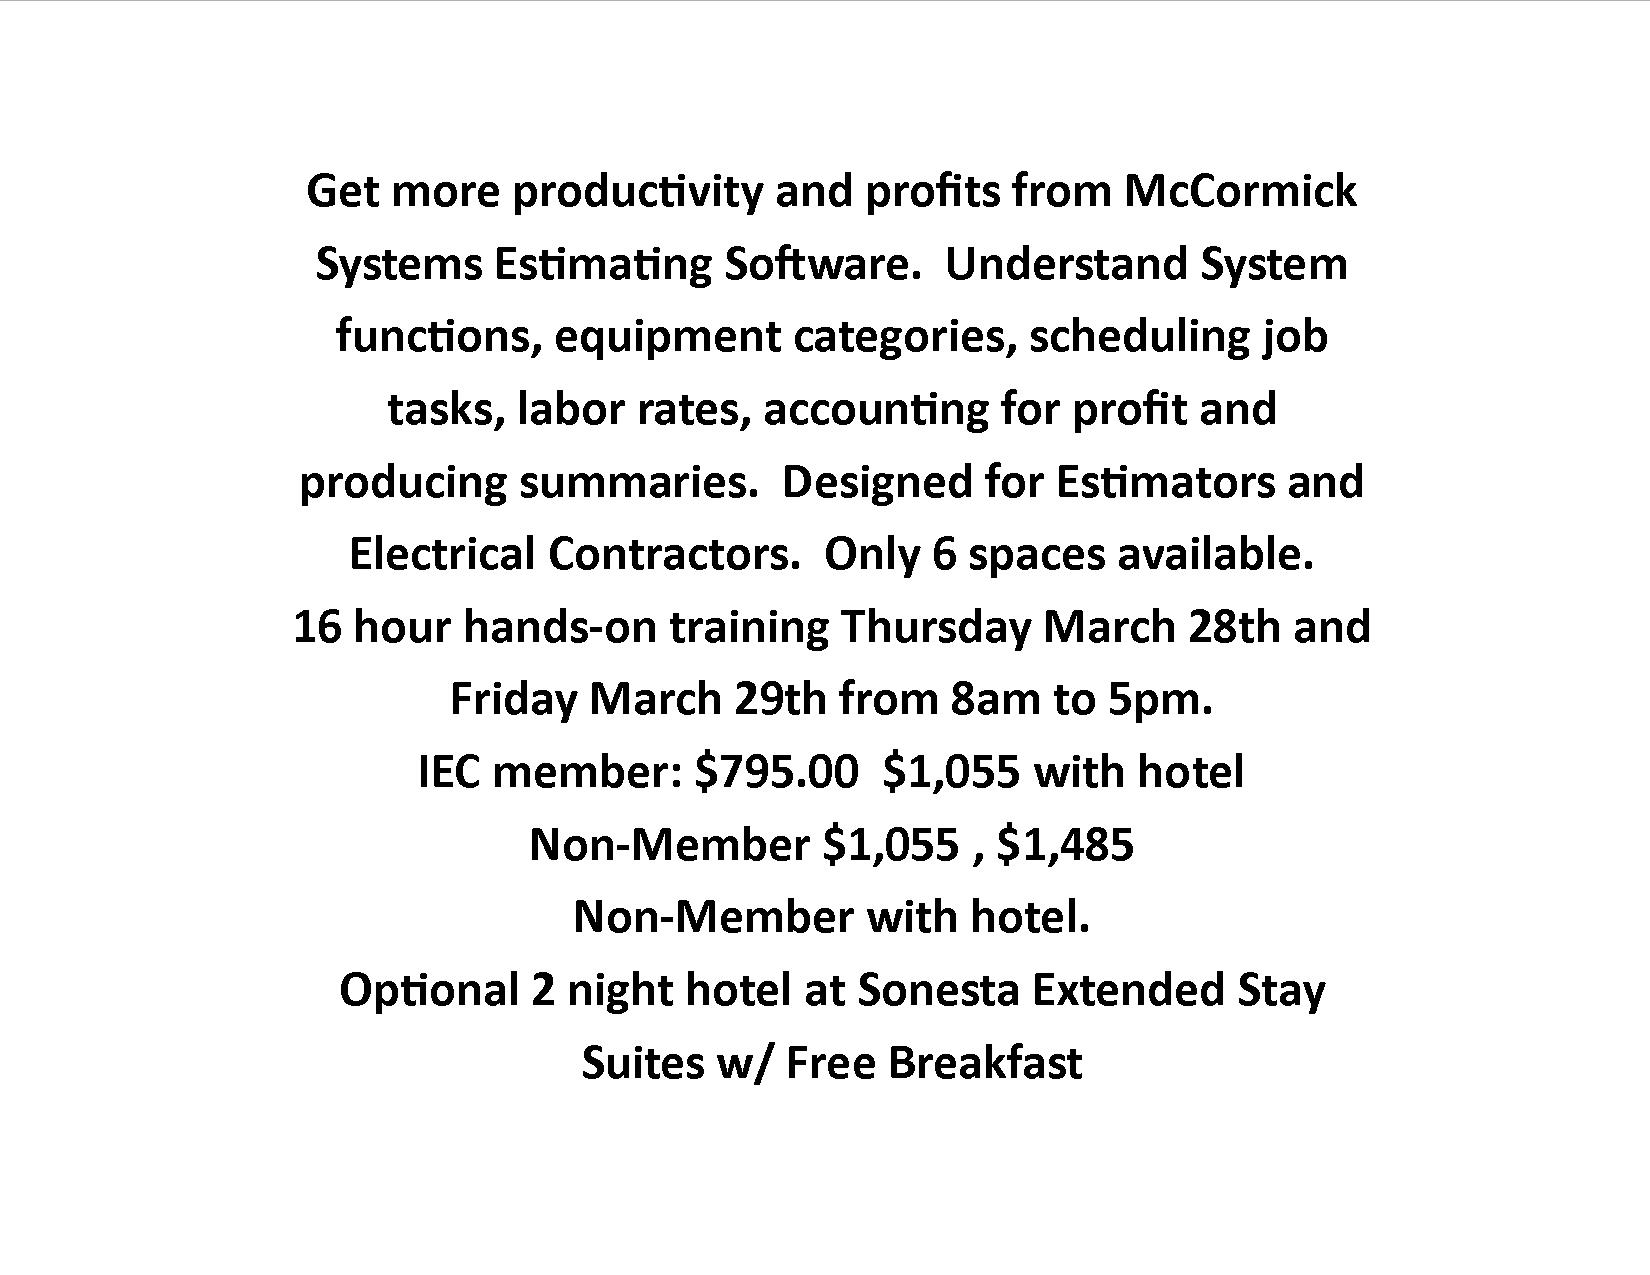 042019 Intro to Estimating Software